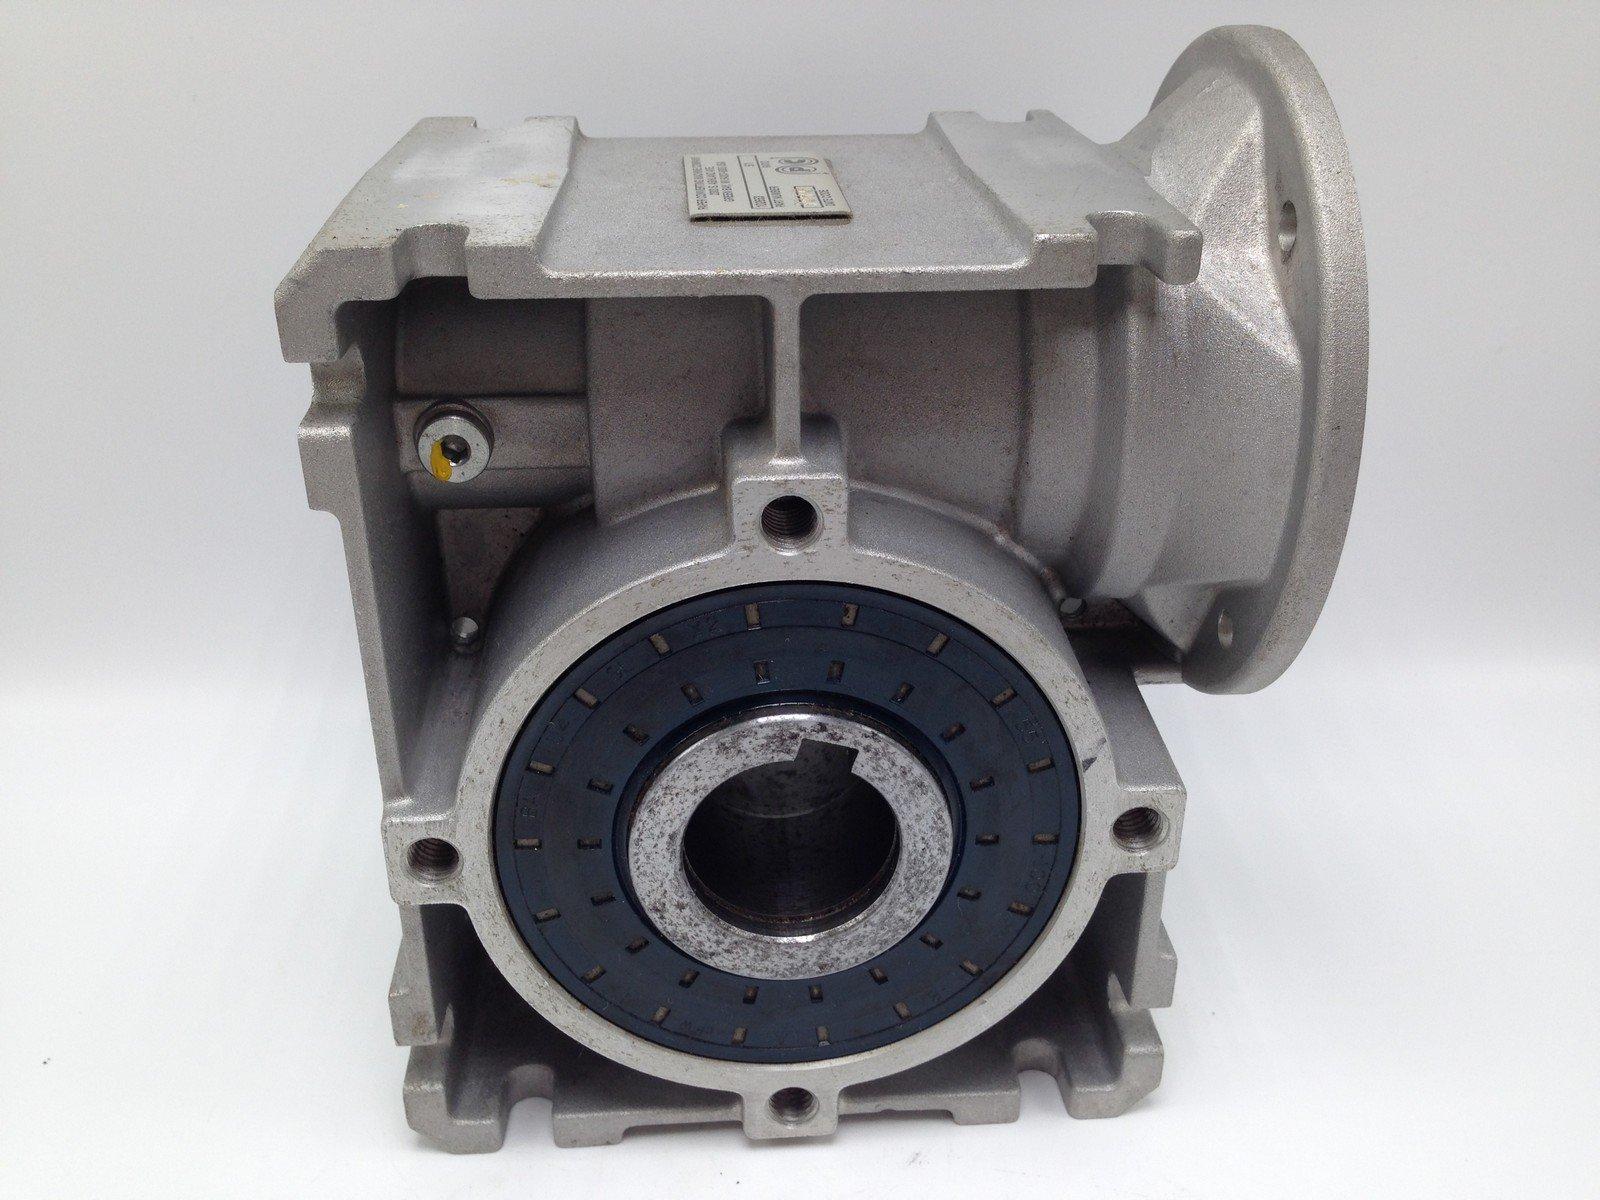  PAPER CONVERTING MACHINE COMPANY 102653 3 WAY GEARBOX, 5:1 RATIO, P/N 102653 